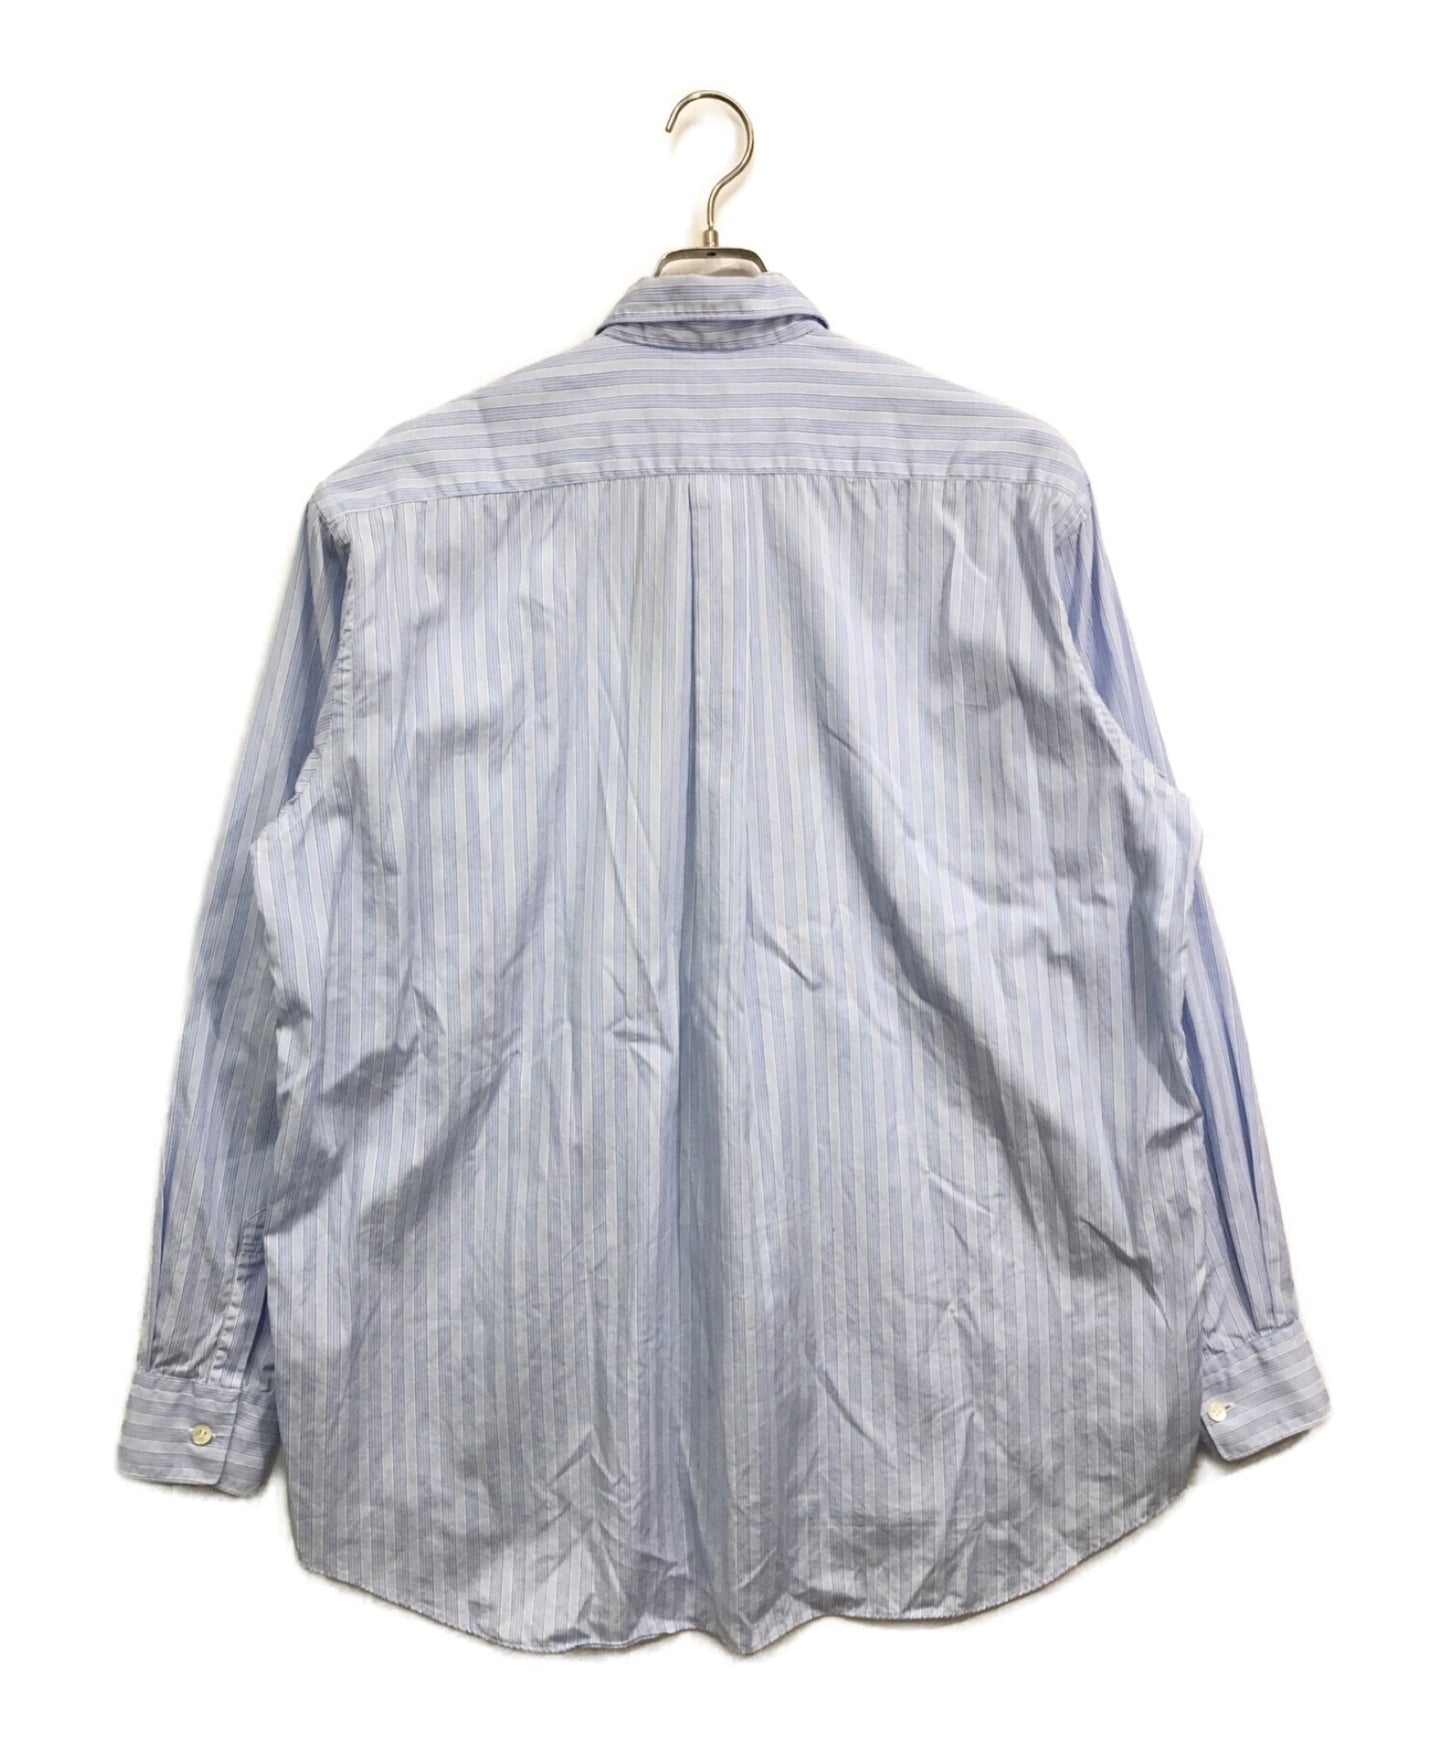 [Pre-owned] COMME des GARCONS SHIRT Embroidered Stripe Shirt / Long Sleeve Shirts / Embroidery / AD1994 FW-01019M